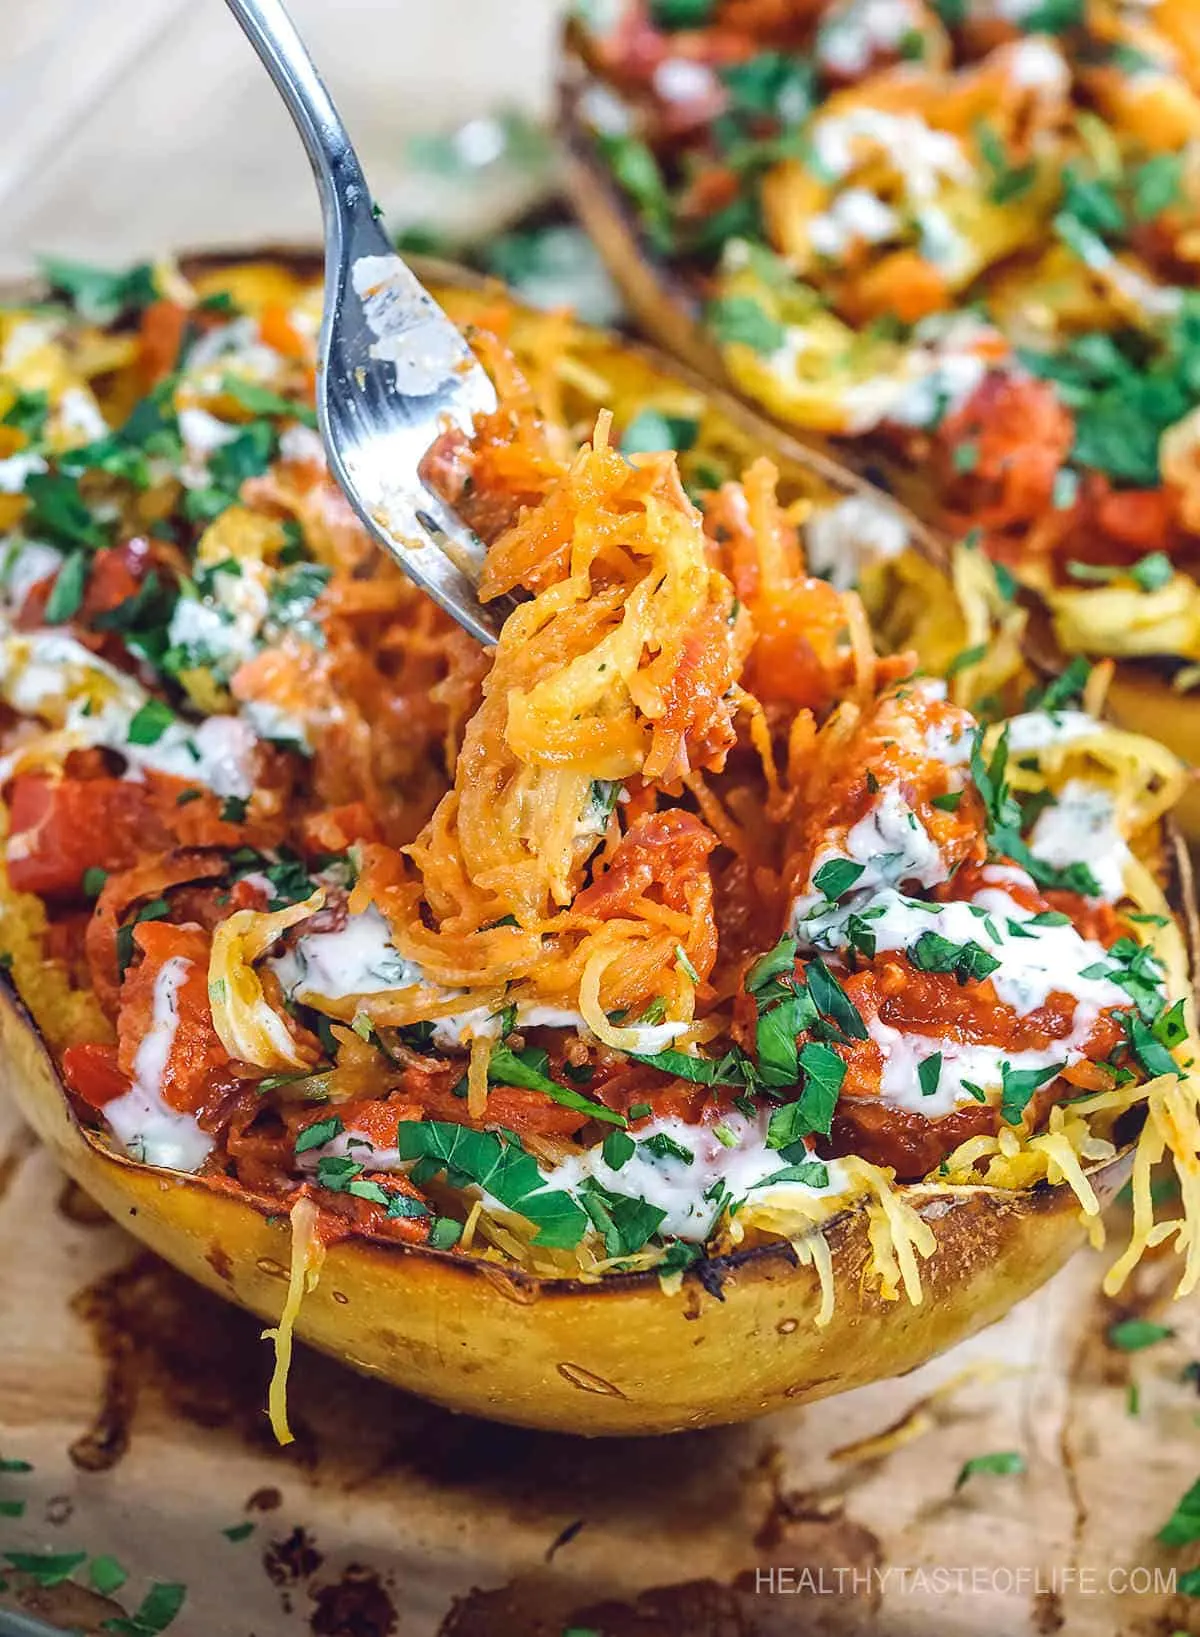 Healthy chicken spaghetti squash recipe – baked in the oven until caramelized, stuffed with shredded chicken breast and tossed together in a vibrant BBQ sauce – a delicious lunch or dinner made with only whole foods. This healthy chicken spaghetti squash boats are also keto, low carb, whole30 and paleo friendly! See video and printable recipe. #lowcarbspaghettisquash #healthyspaghettisquash #spaghettisquashboats #healthyspaghettisquashrecipe #chickenrecipes